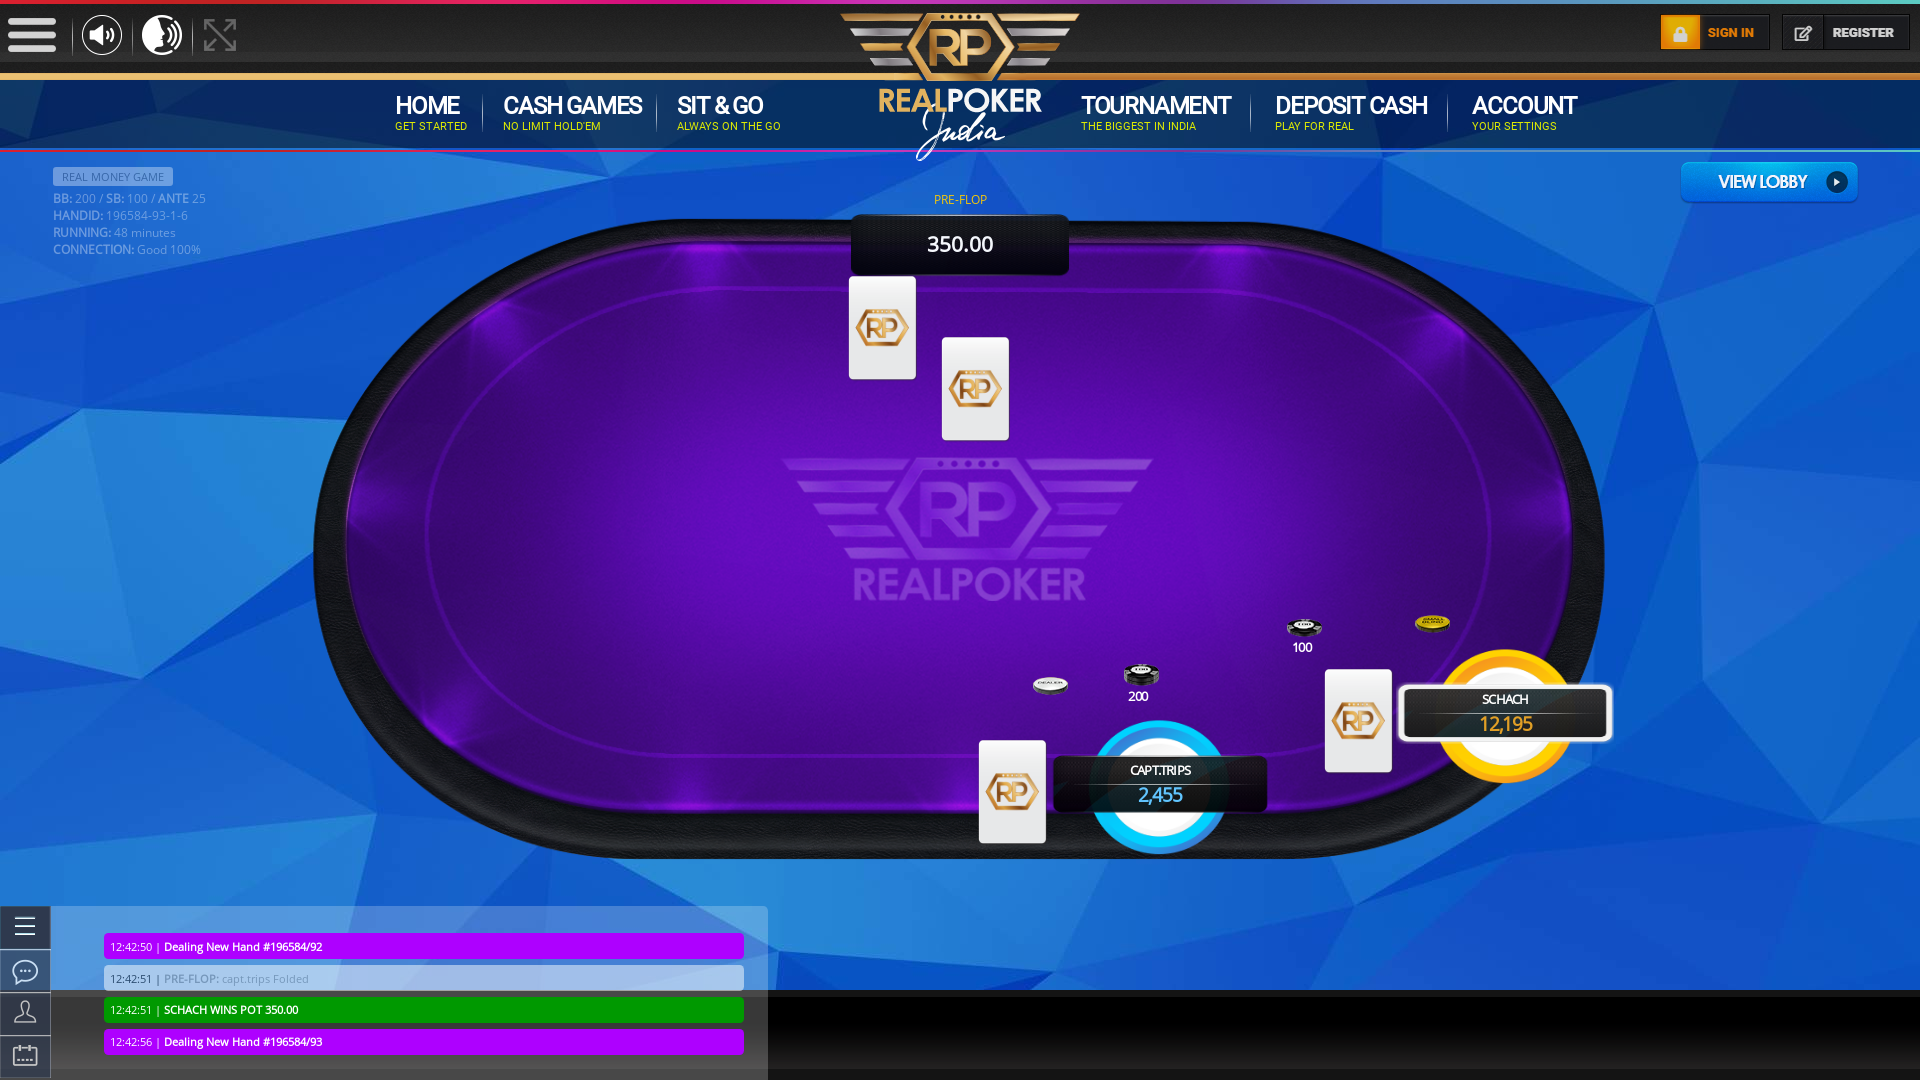 Real poker 10 player table in the 47th minute of the match